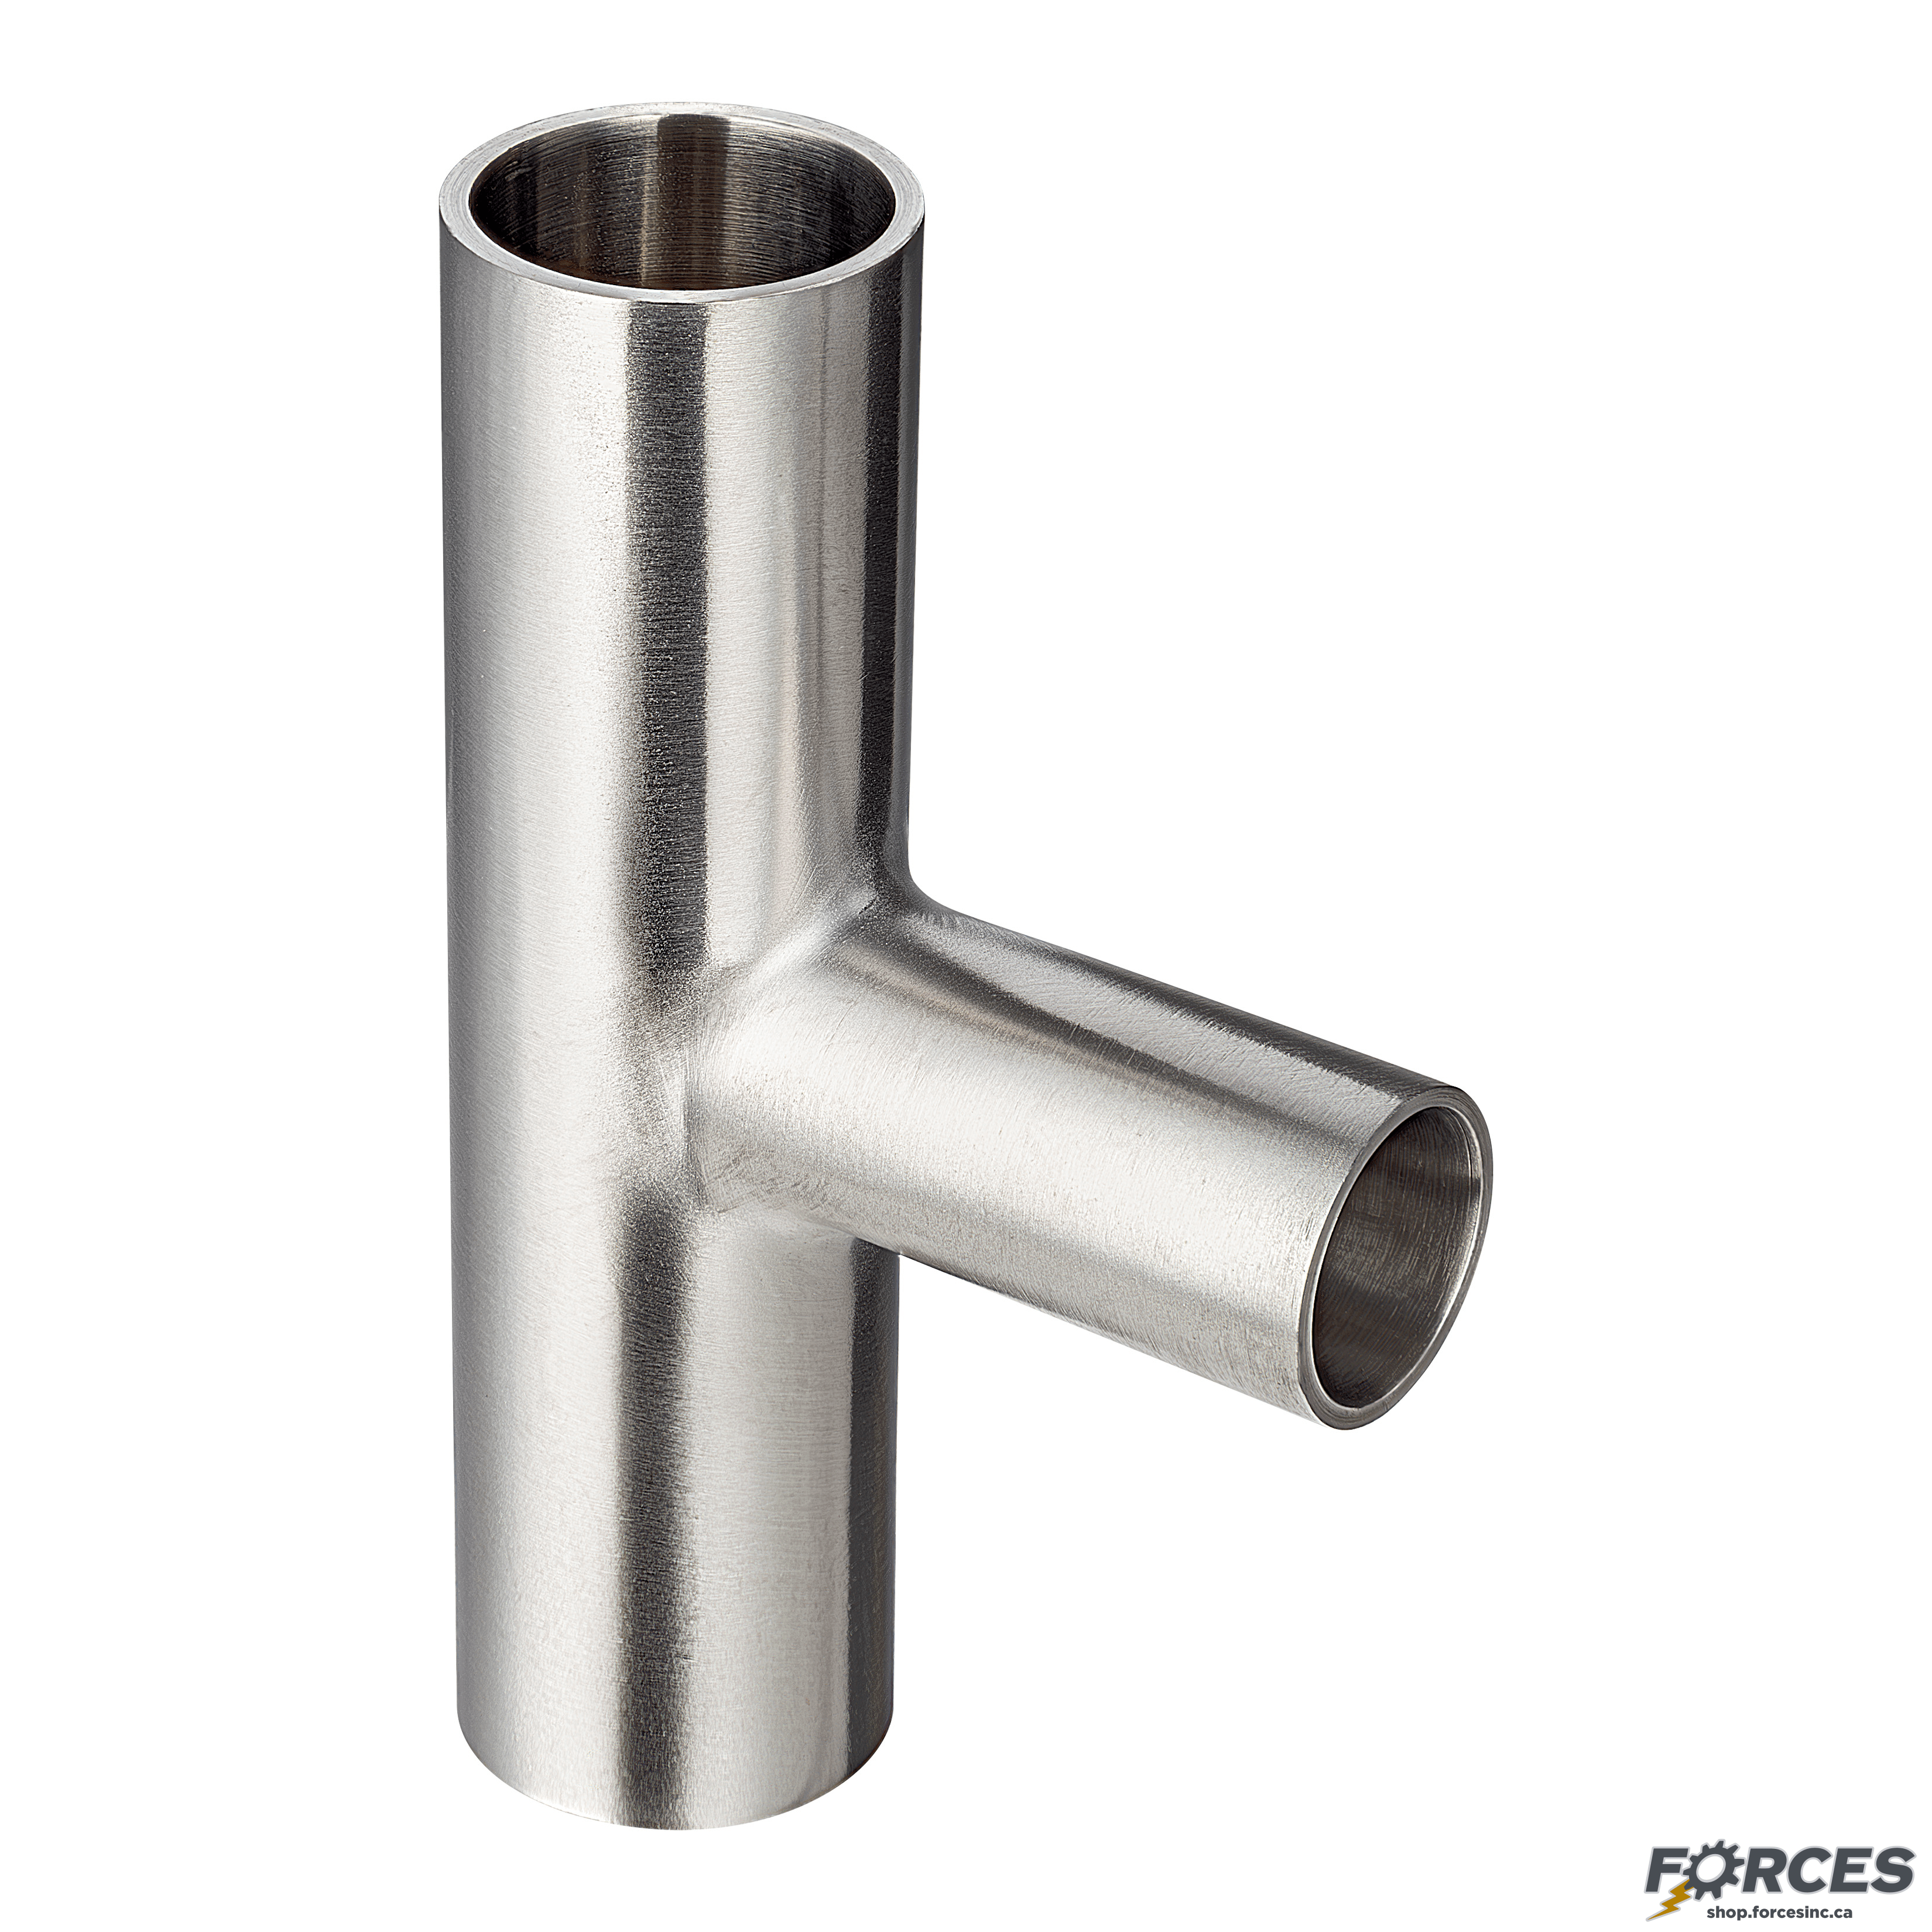 6" x 2" Butt Weld Tee Reducer - Stainless Steel 316 - Forces Inc